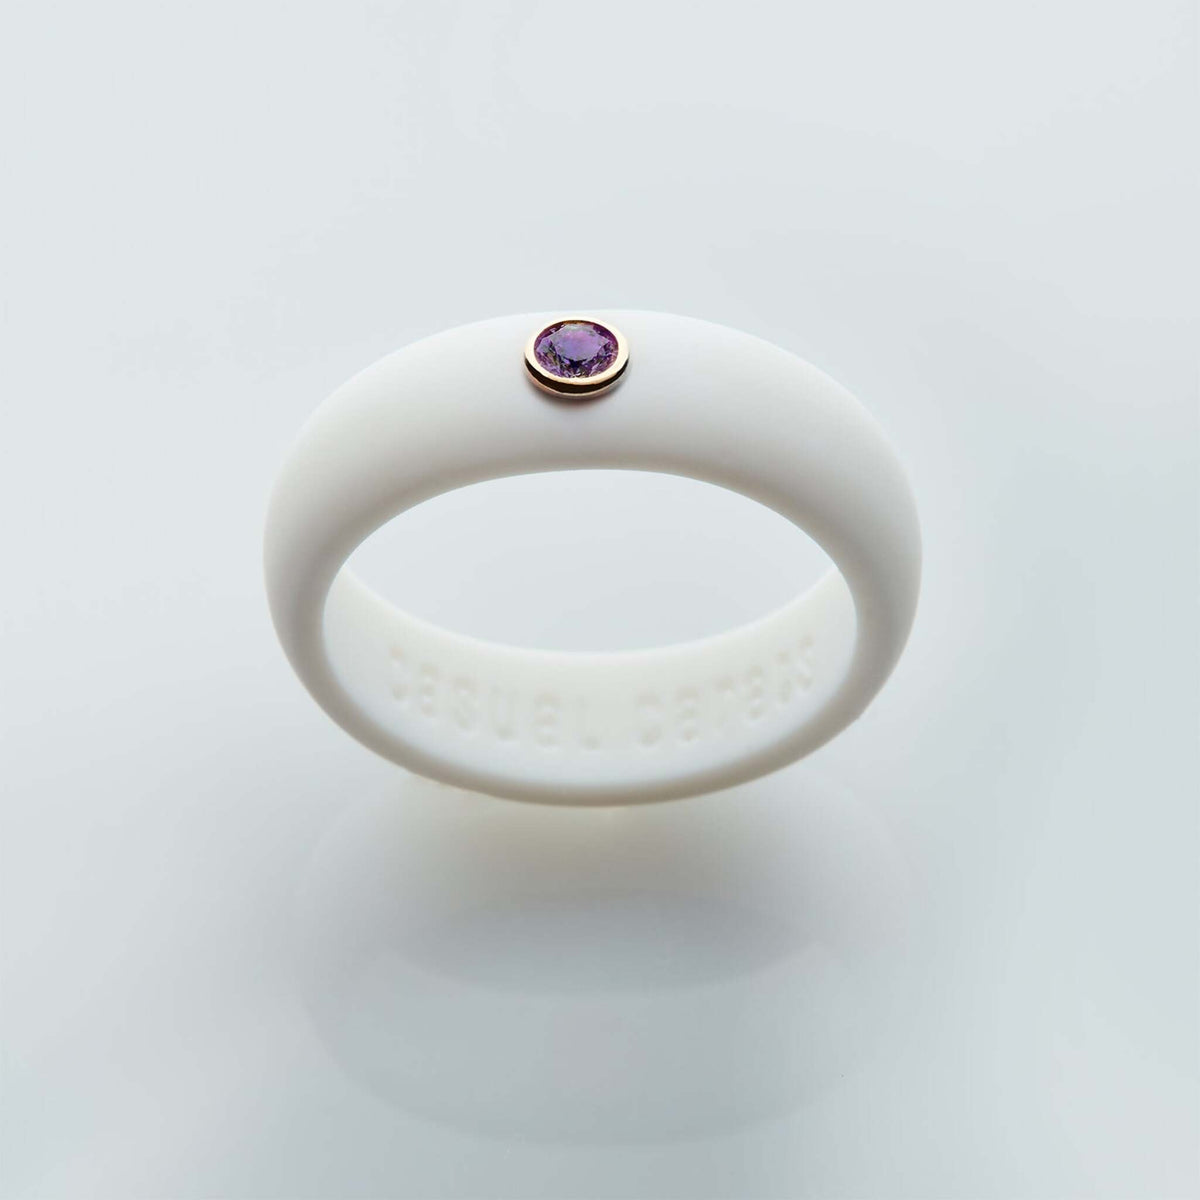 Casual Carats - Birthstone Collection - February - Amethyst Silicone Ring / Available in a Variety of Silicone Band Colors